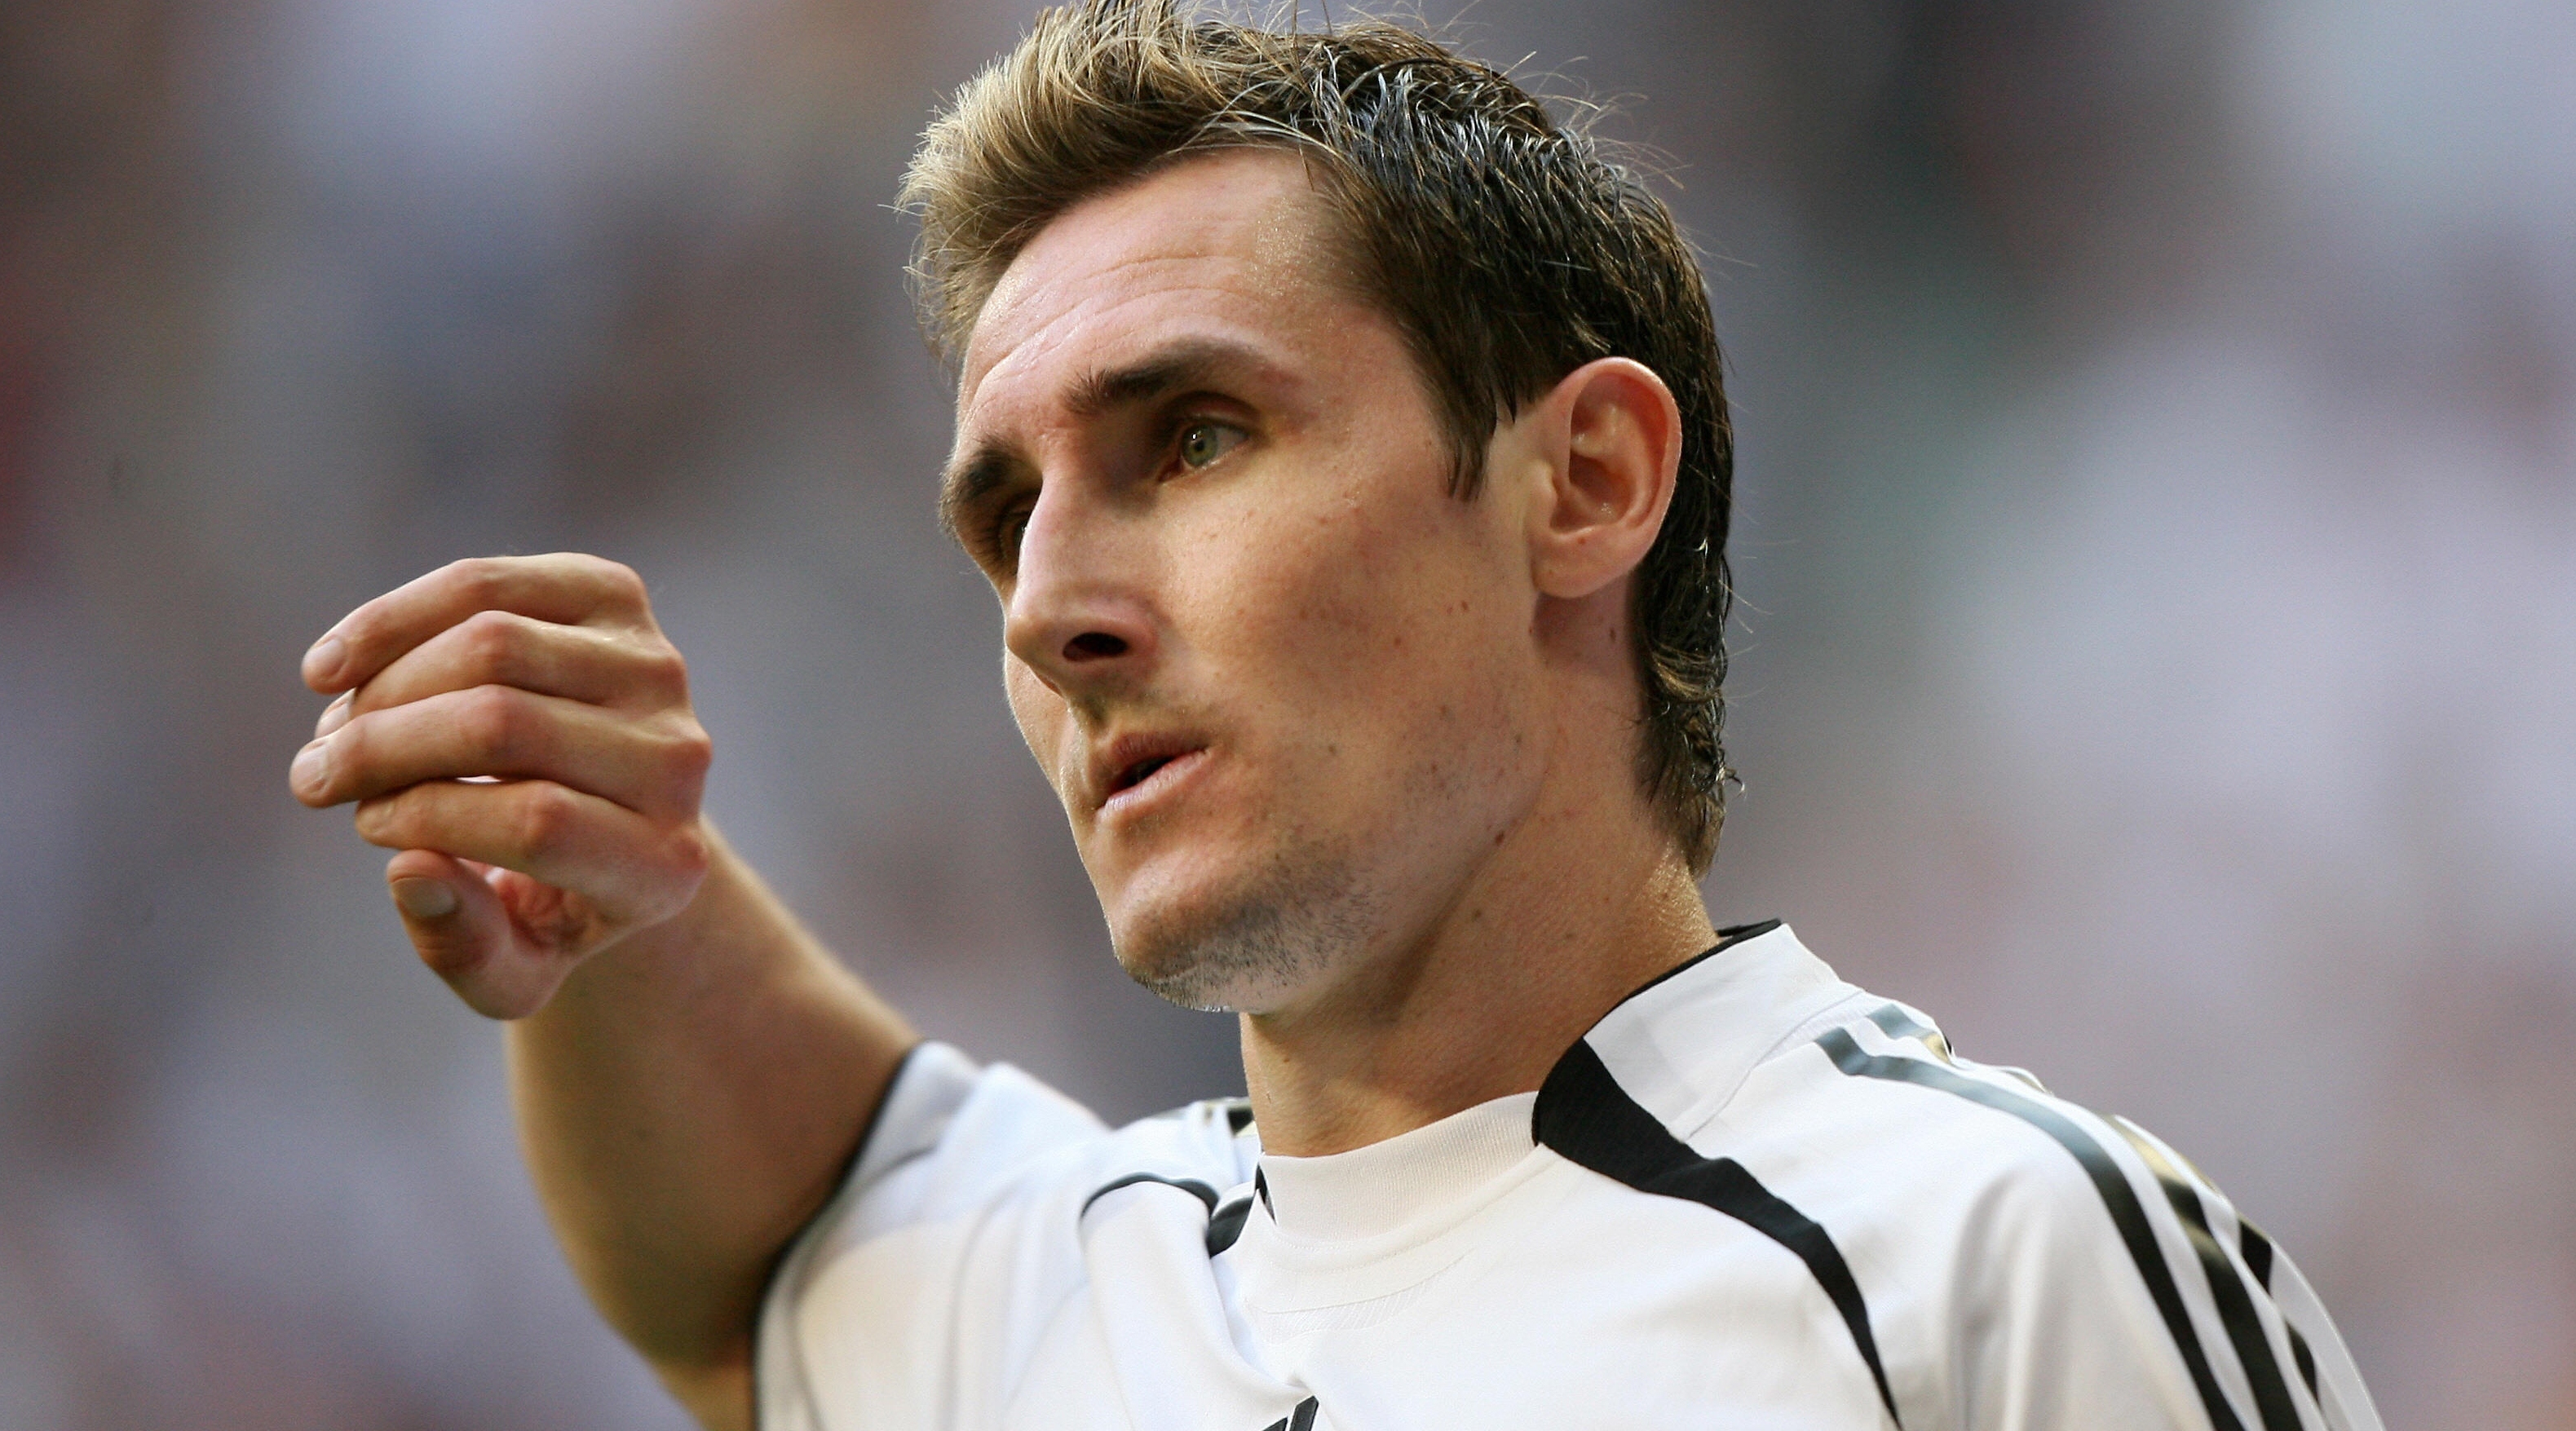 Munich, GERMANY: German forward Miroslav Klose gestures after scoring against Costa Rica during their opening match at Munich's World Cup Stadium in football's 2006 World Cup, 09 June 2006. Germany were leading 3-2 in the second half. AFP PHOTO / VALERY HACHE (Photo credit should read VALERY HACHE/AFP via Getty Images)